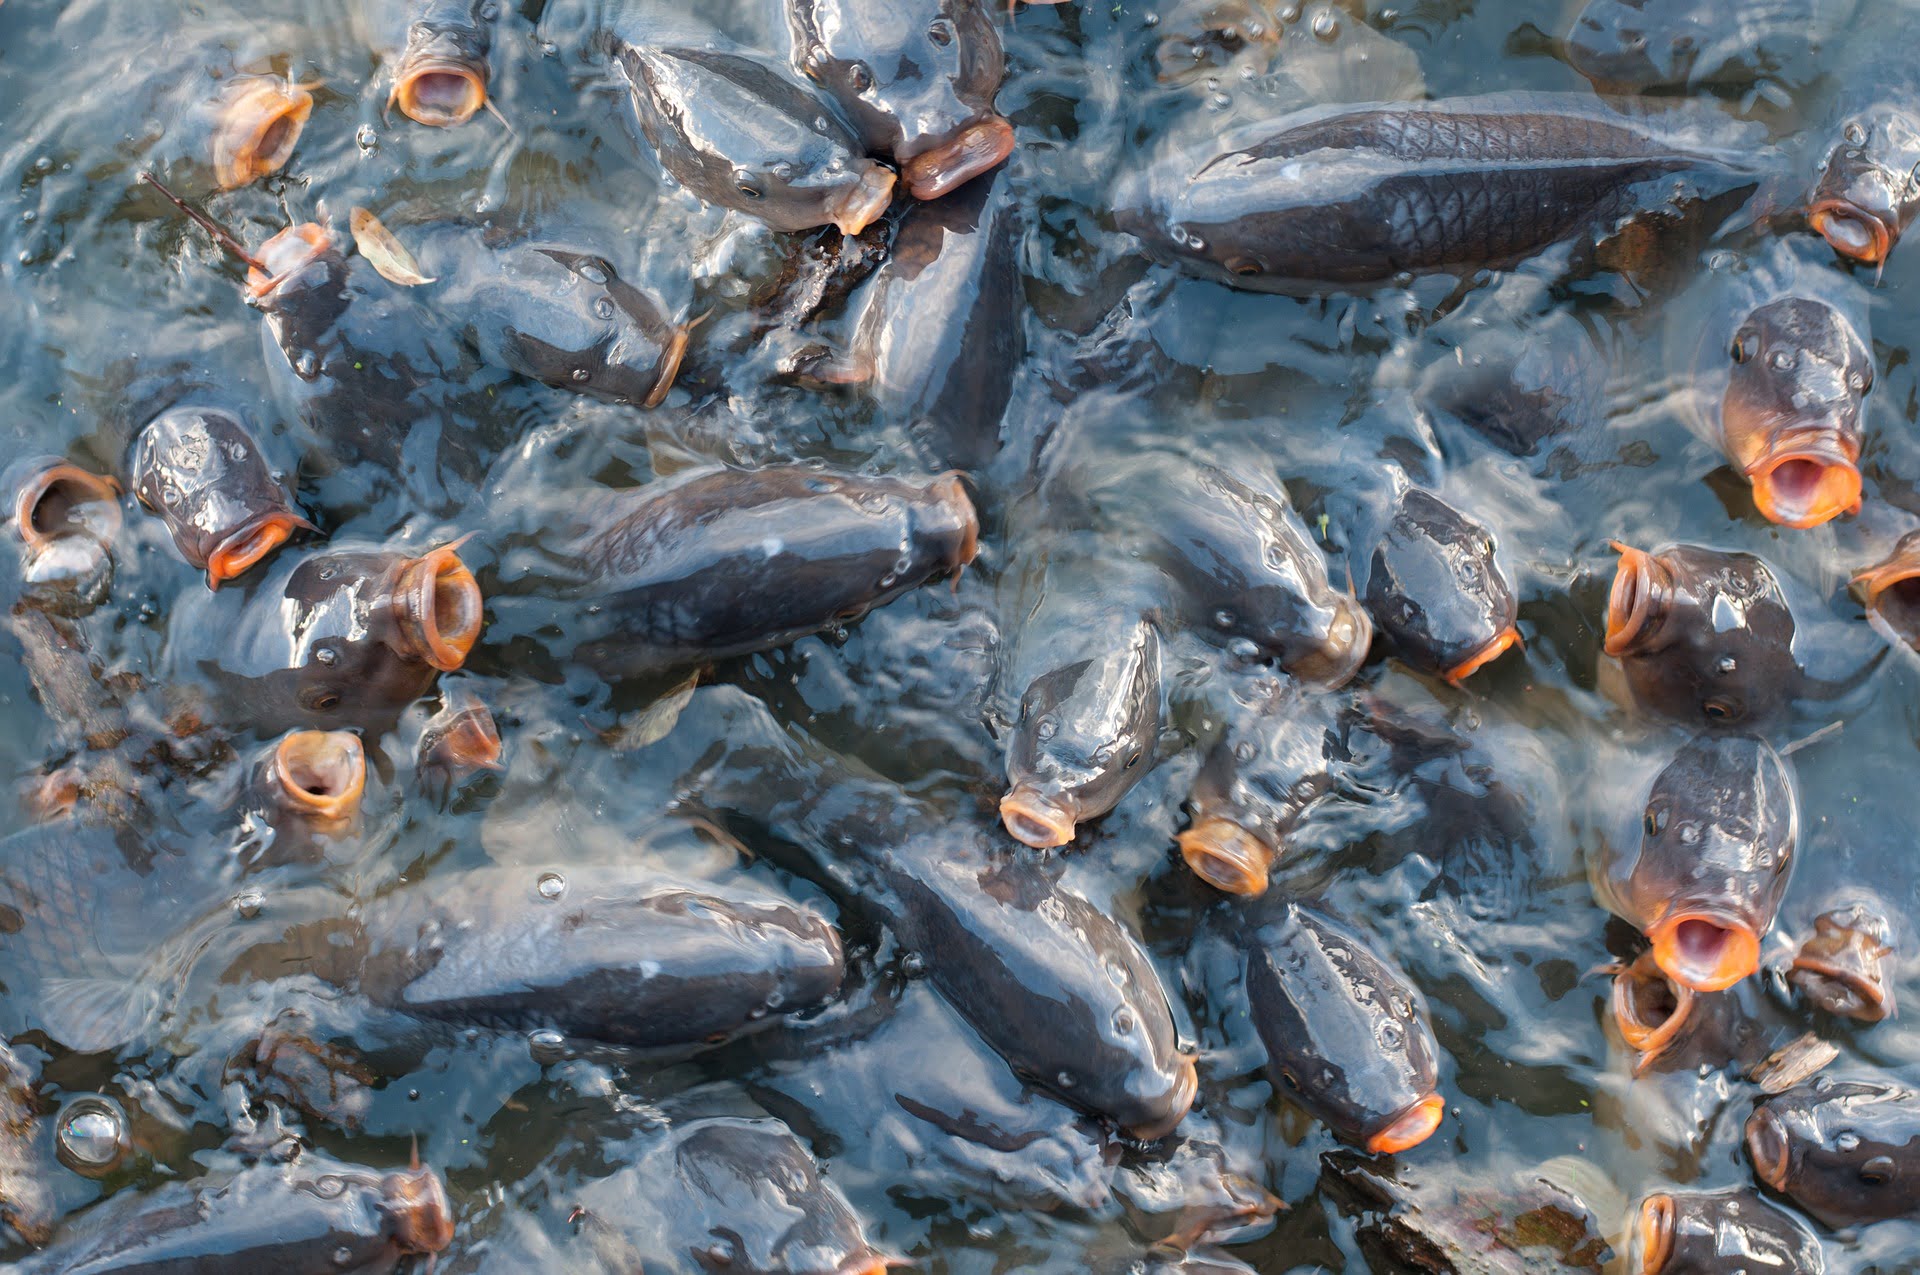 Dozens of carp swim and writhe over one another in an incredibly dense swarm.